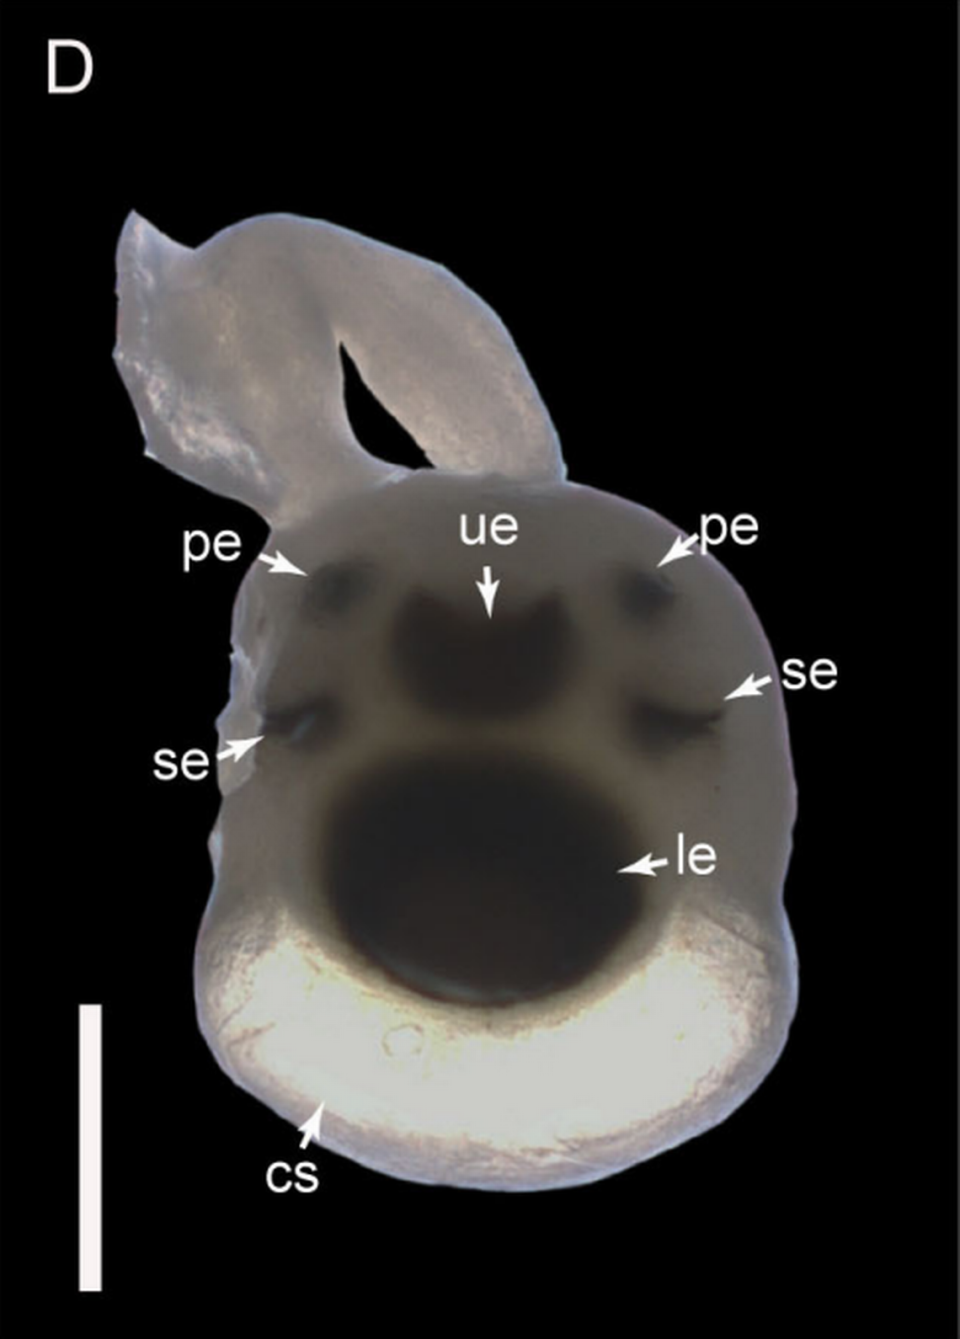 A diagram of the Tripedalia maipoensis jellyfish showing six of the animal’s eyes. The abbreviation ‘le’ means “lower lens eye,” ‘pe’ means “pit eye,” ‘se’ means “slit eye” and ‘ue’ means upper lens eye.